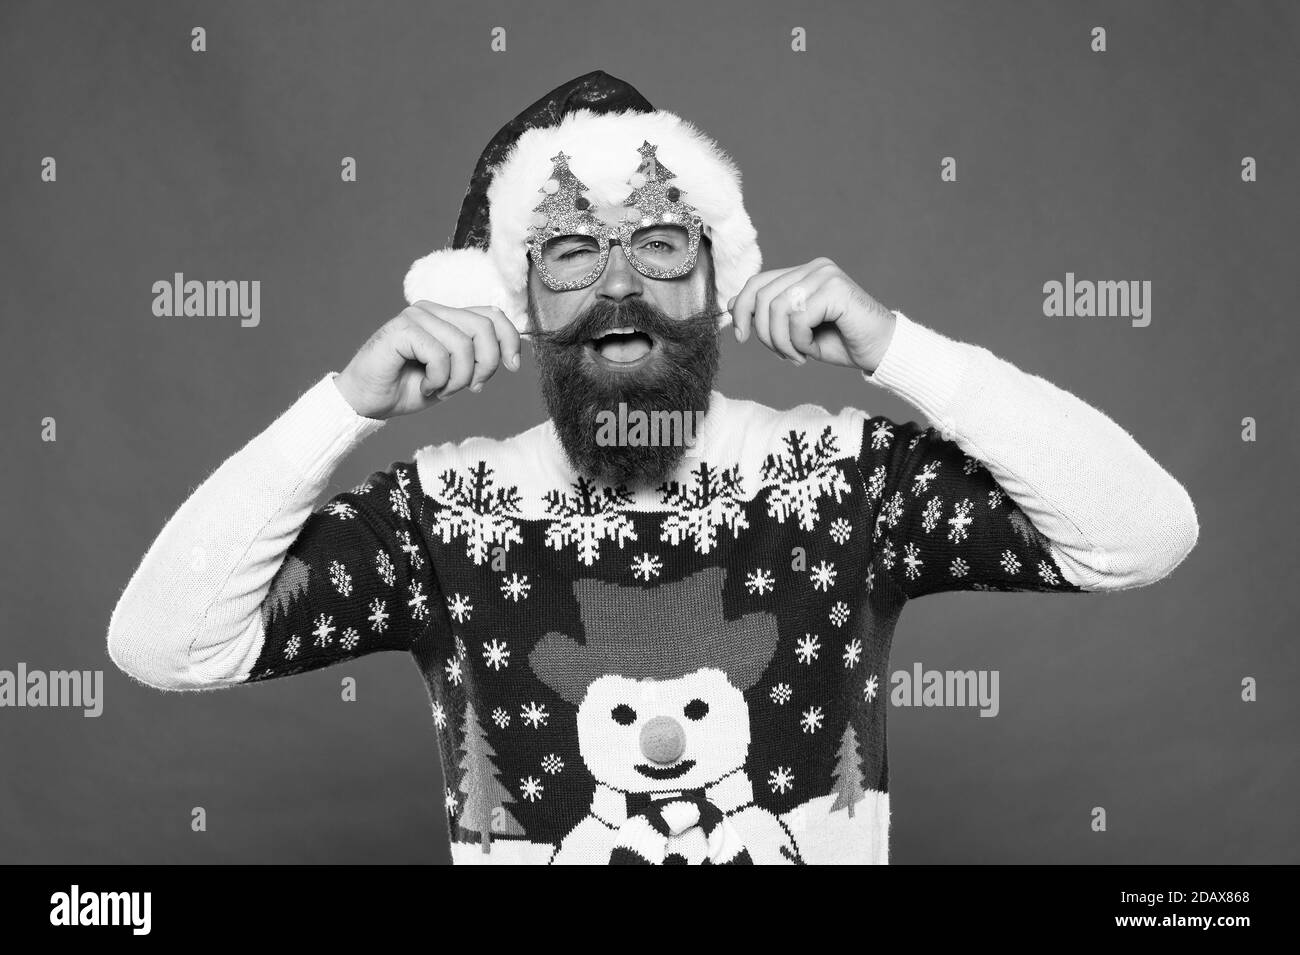 Be fashionable and celebrate. Happy hipster in fashionable santa style. Bearded man twirl fashionable mustache. Holiday celebration. Christmas and new year. Fashionable design for festive holidays. Stock Photo